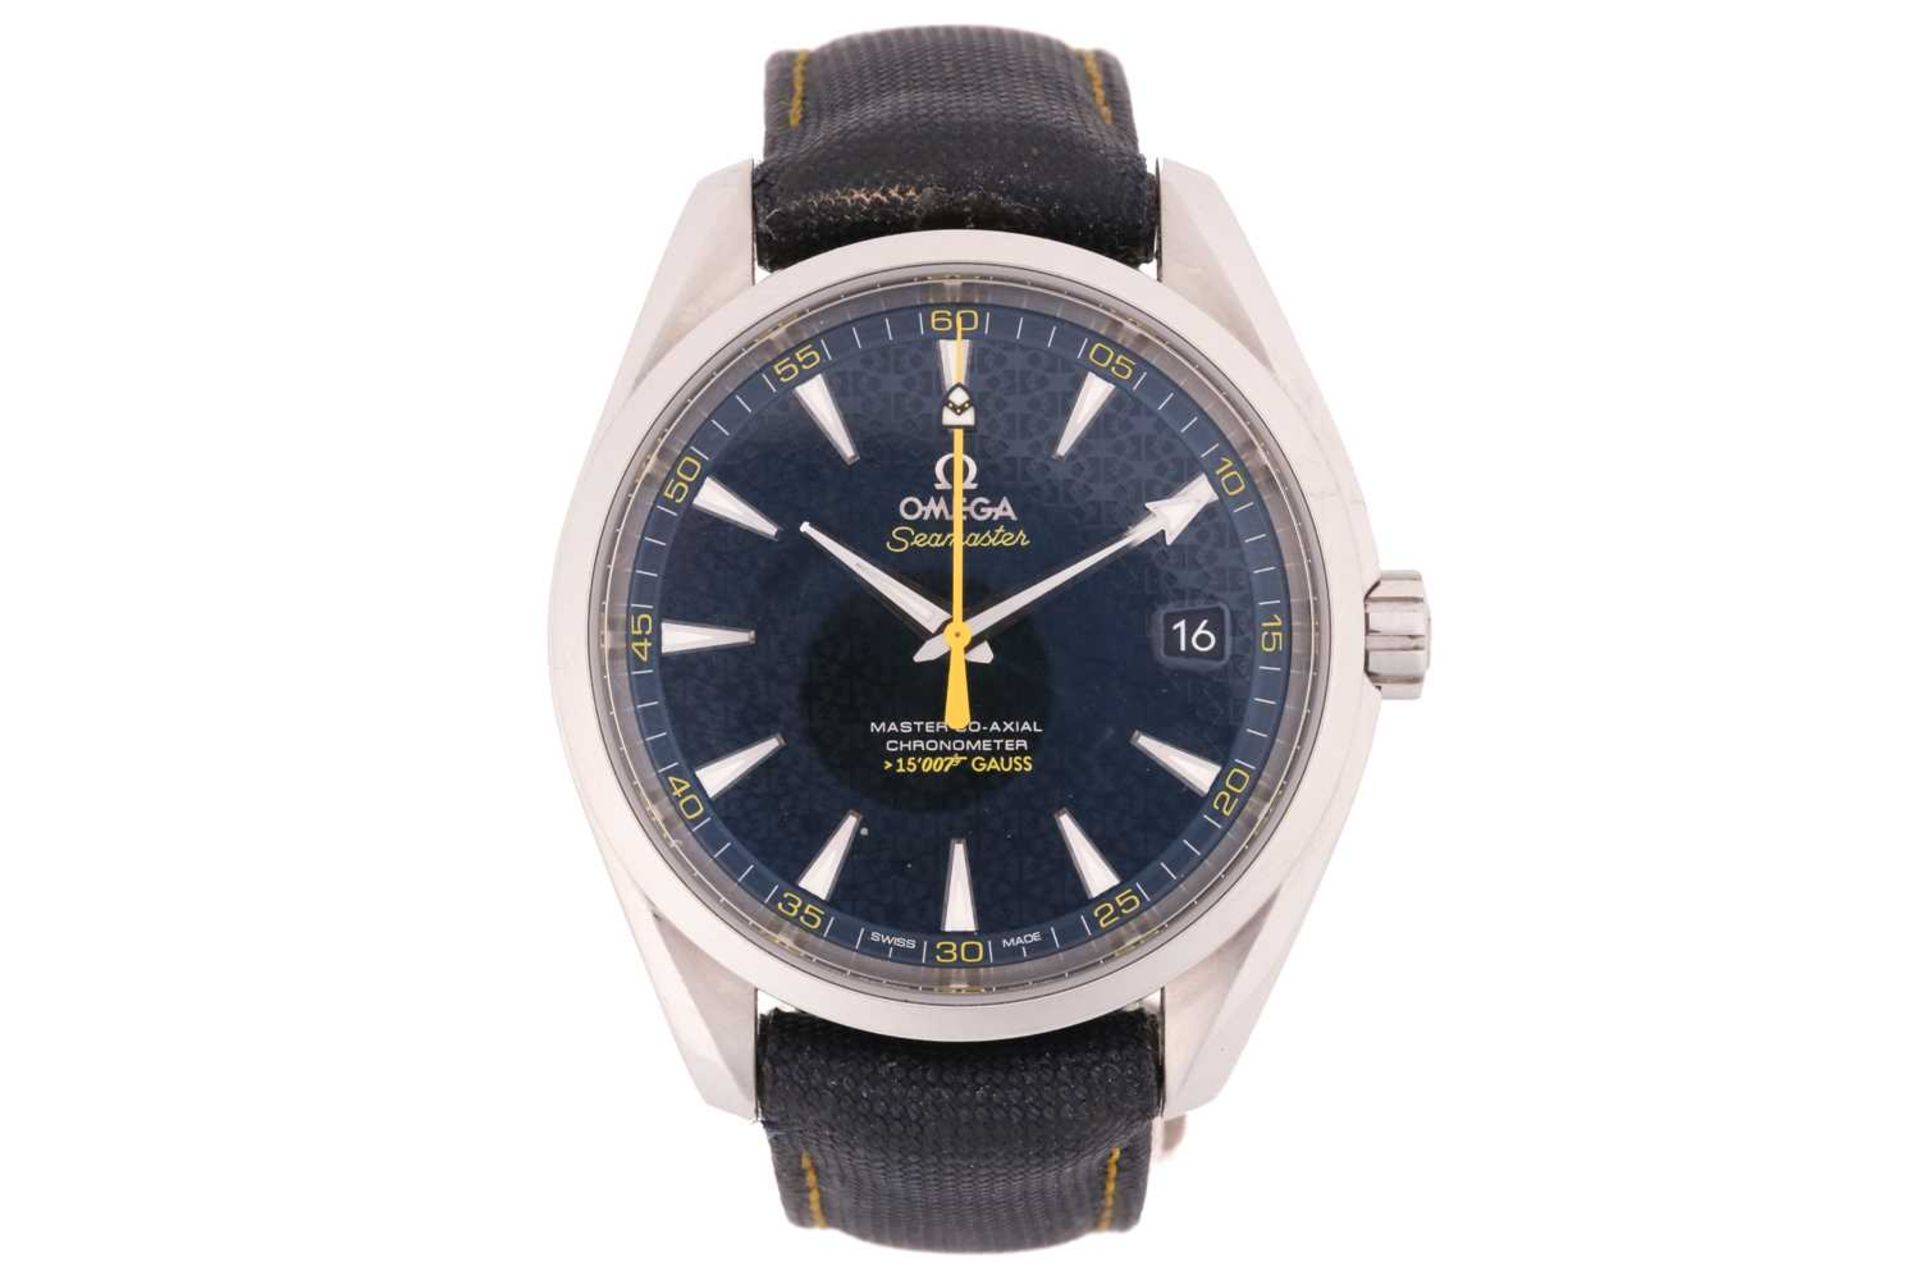 An Omega Seamaster James Bond 007 Aqua Terra stainless steel automatic wristwatch, the blue textured